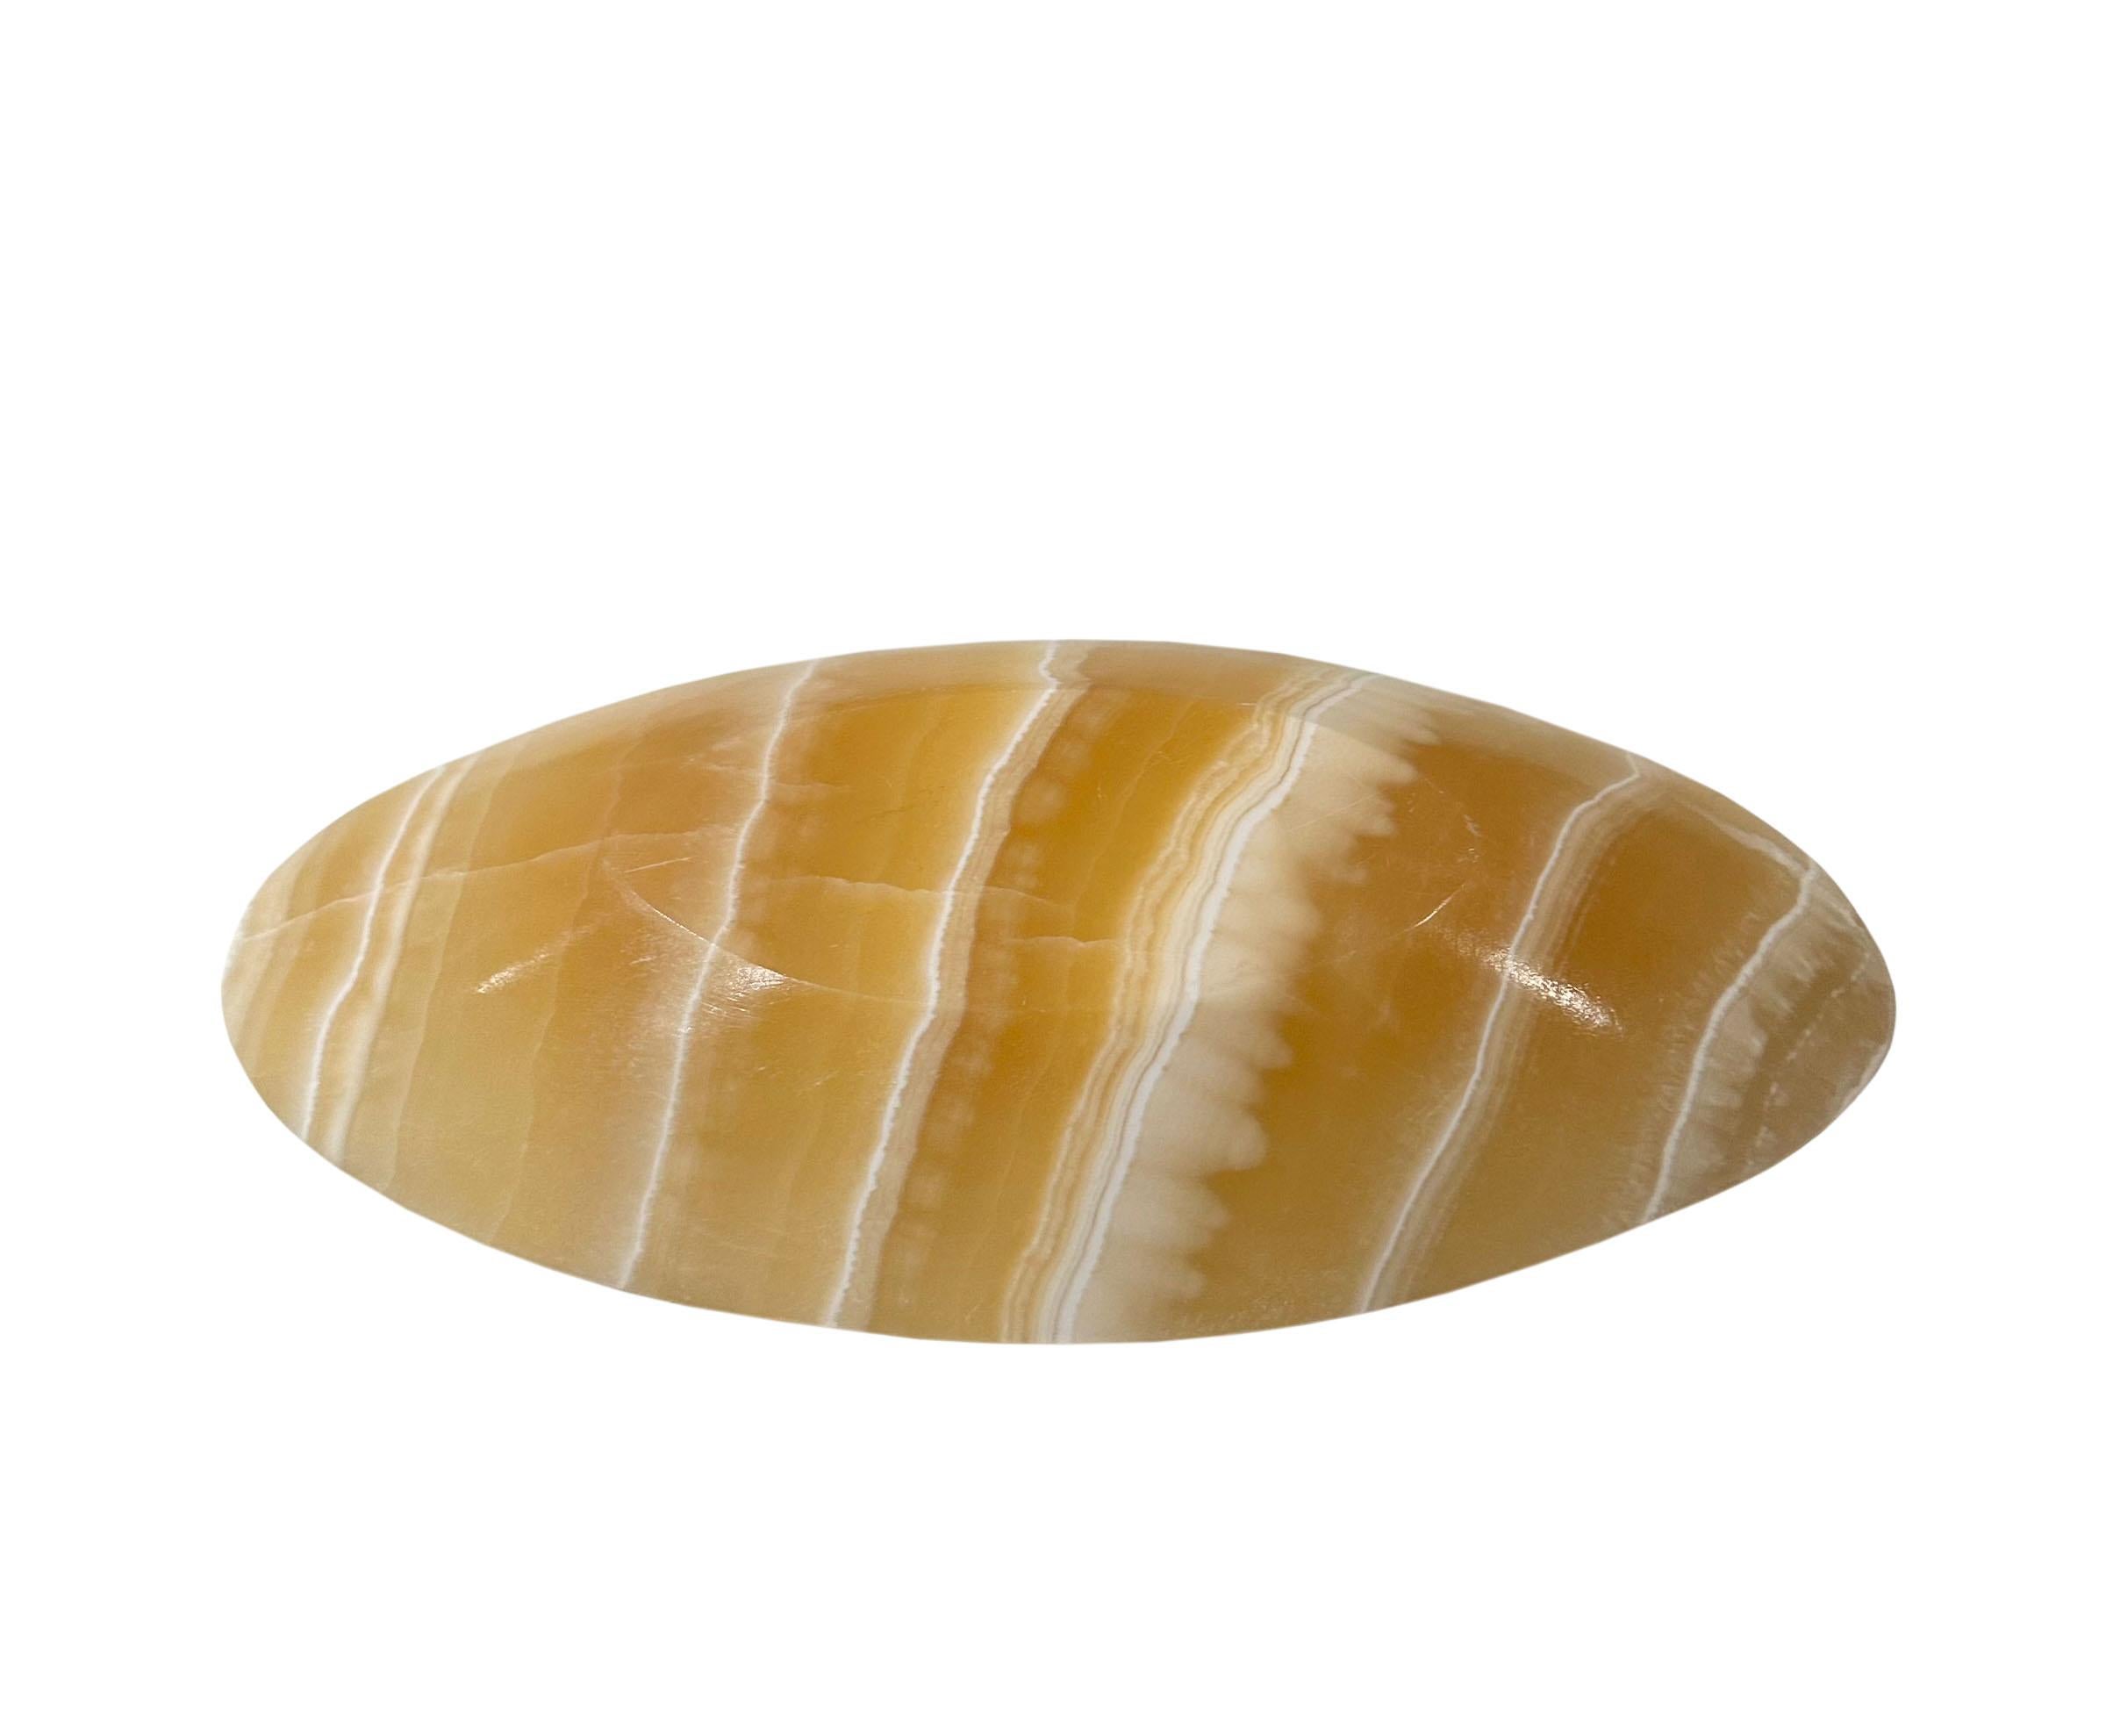 Amber Araconite Alabaster Dish In Good Condition For Sale In Tampa, FL